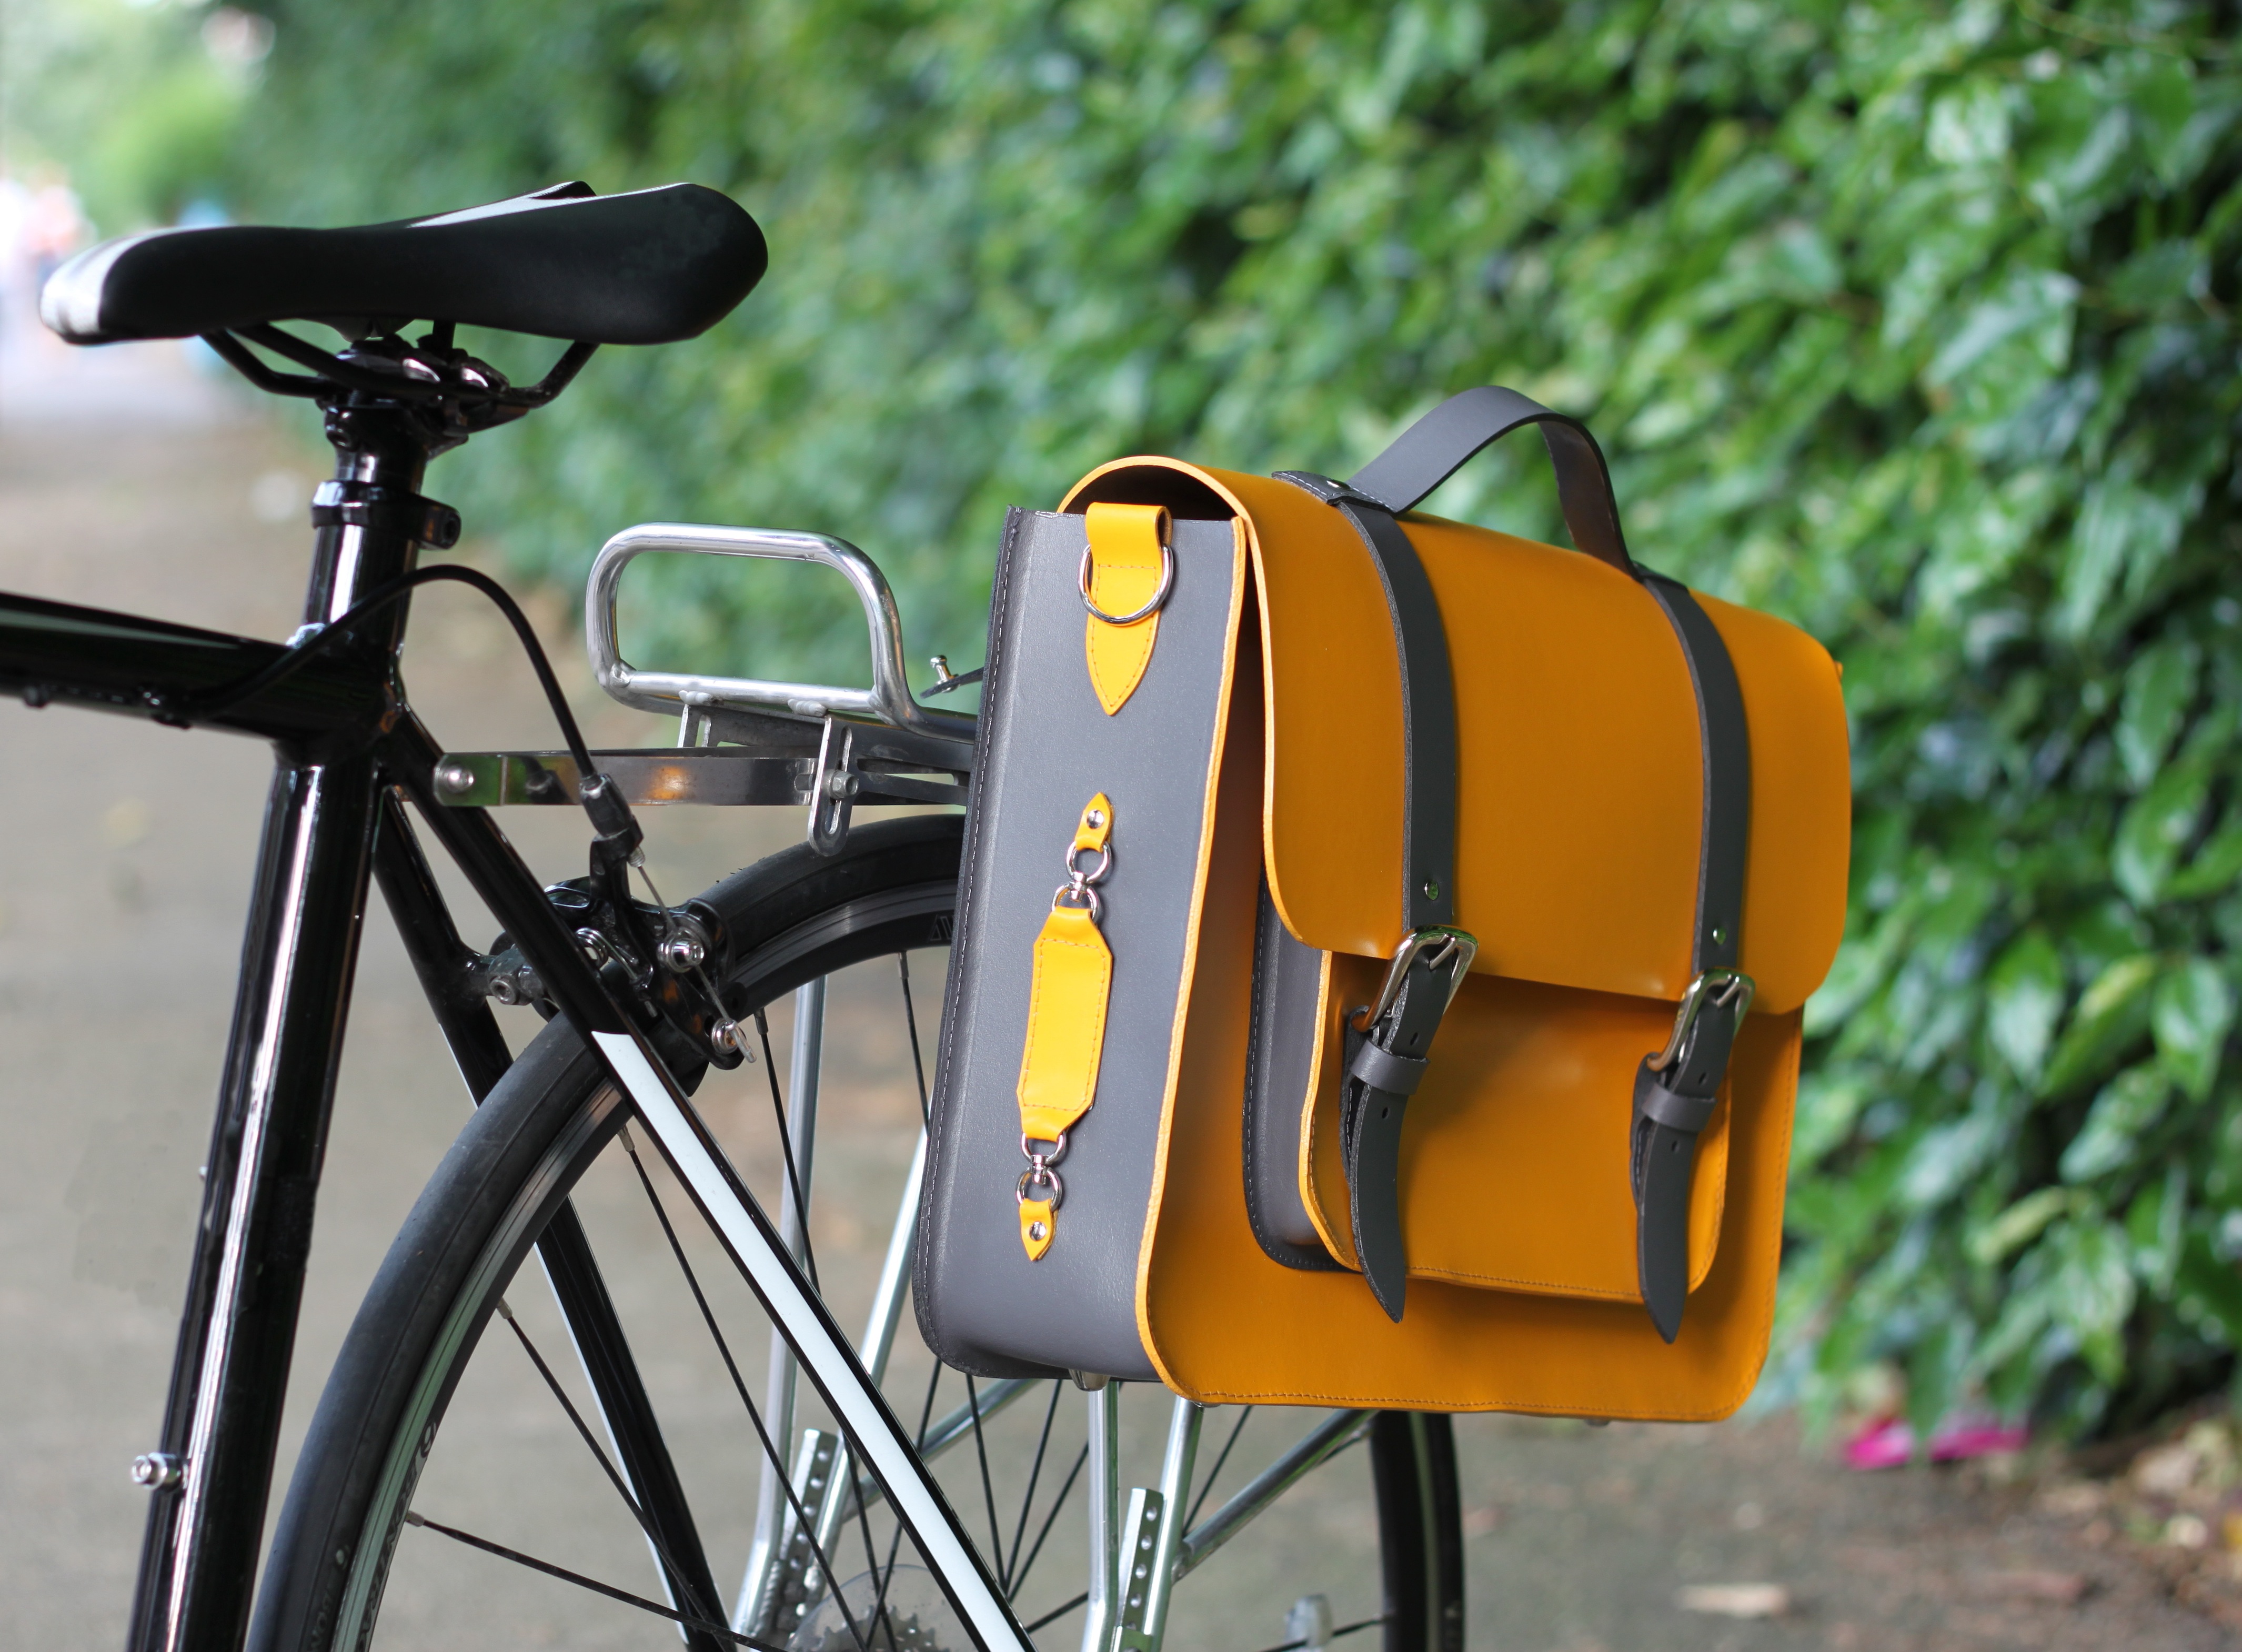 The Bradley satchel for cycling from Hill and Ellis